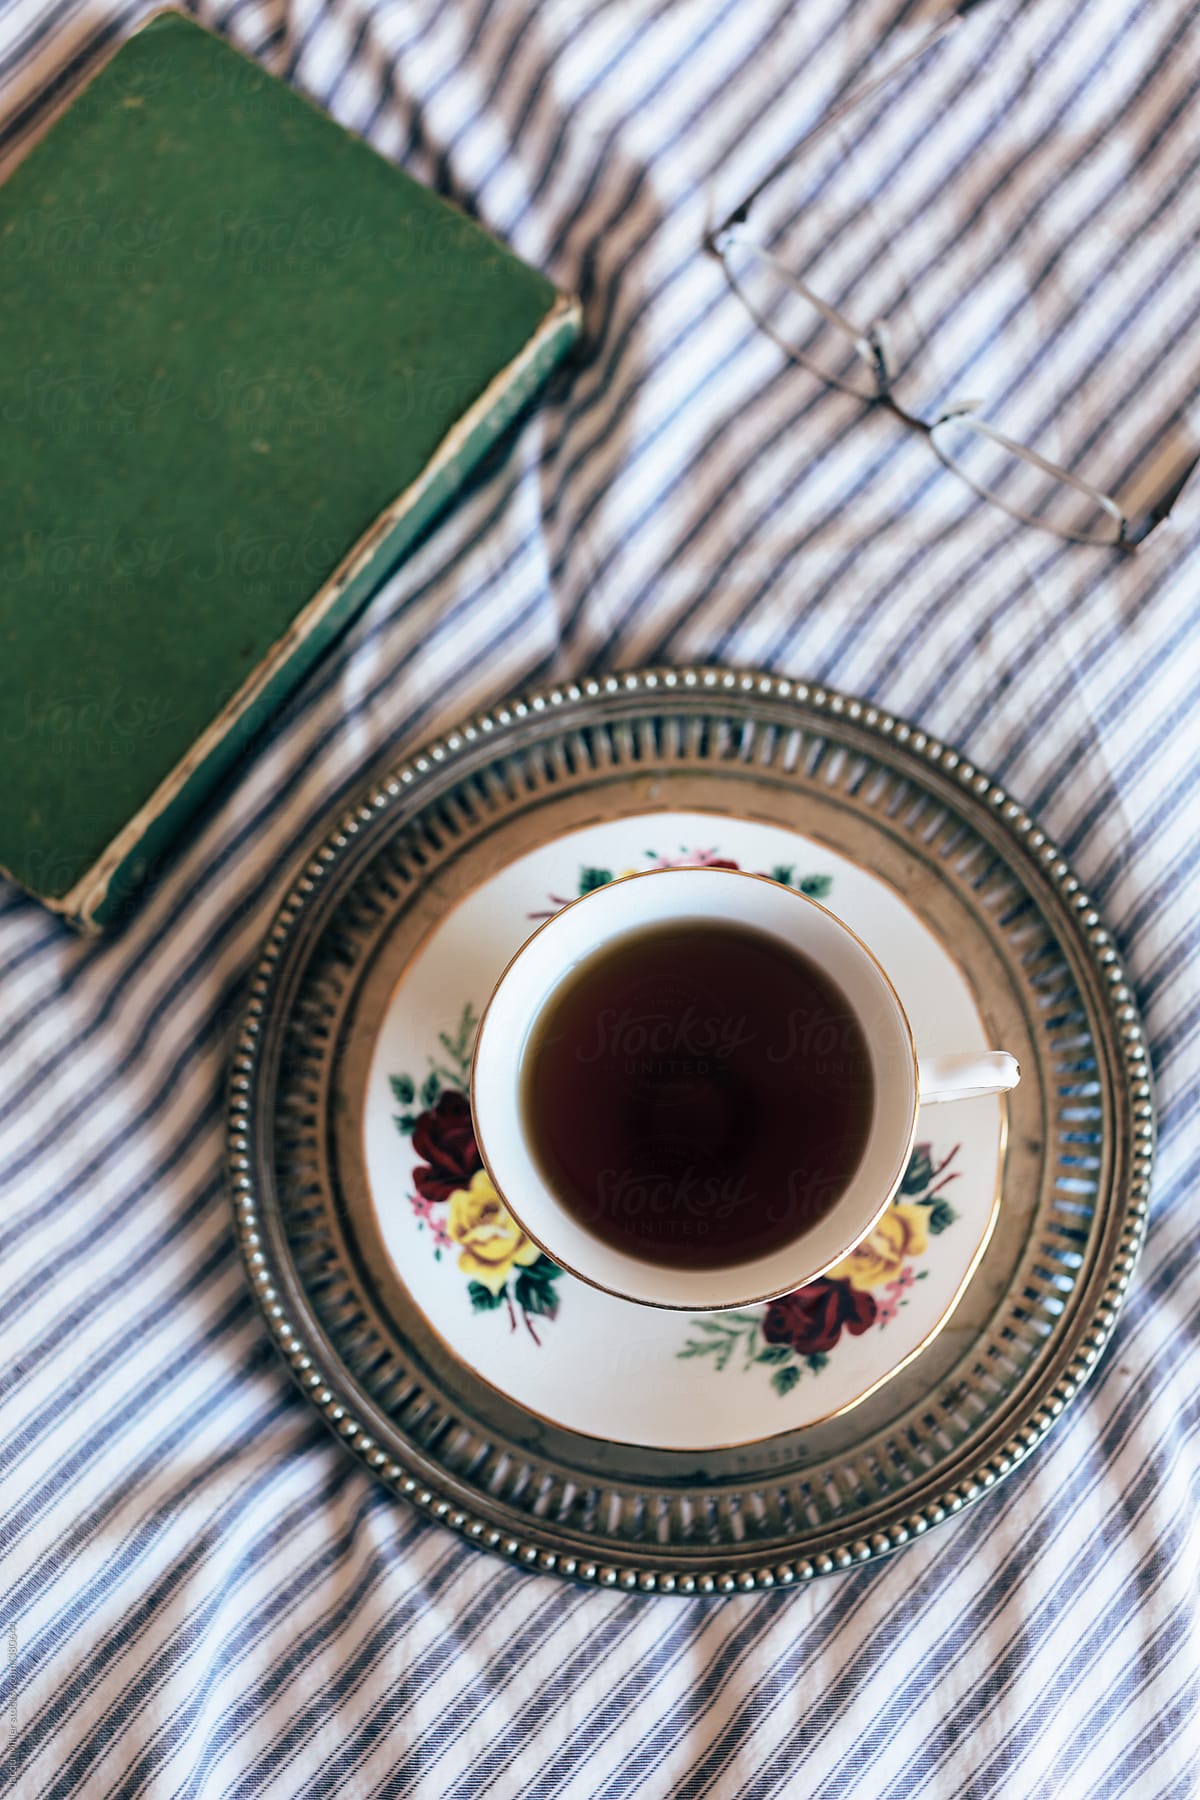 Overhead view of black tea in china cup on vintage tray with closed book and glasses